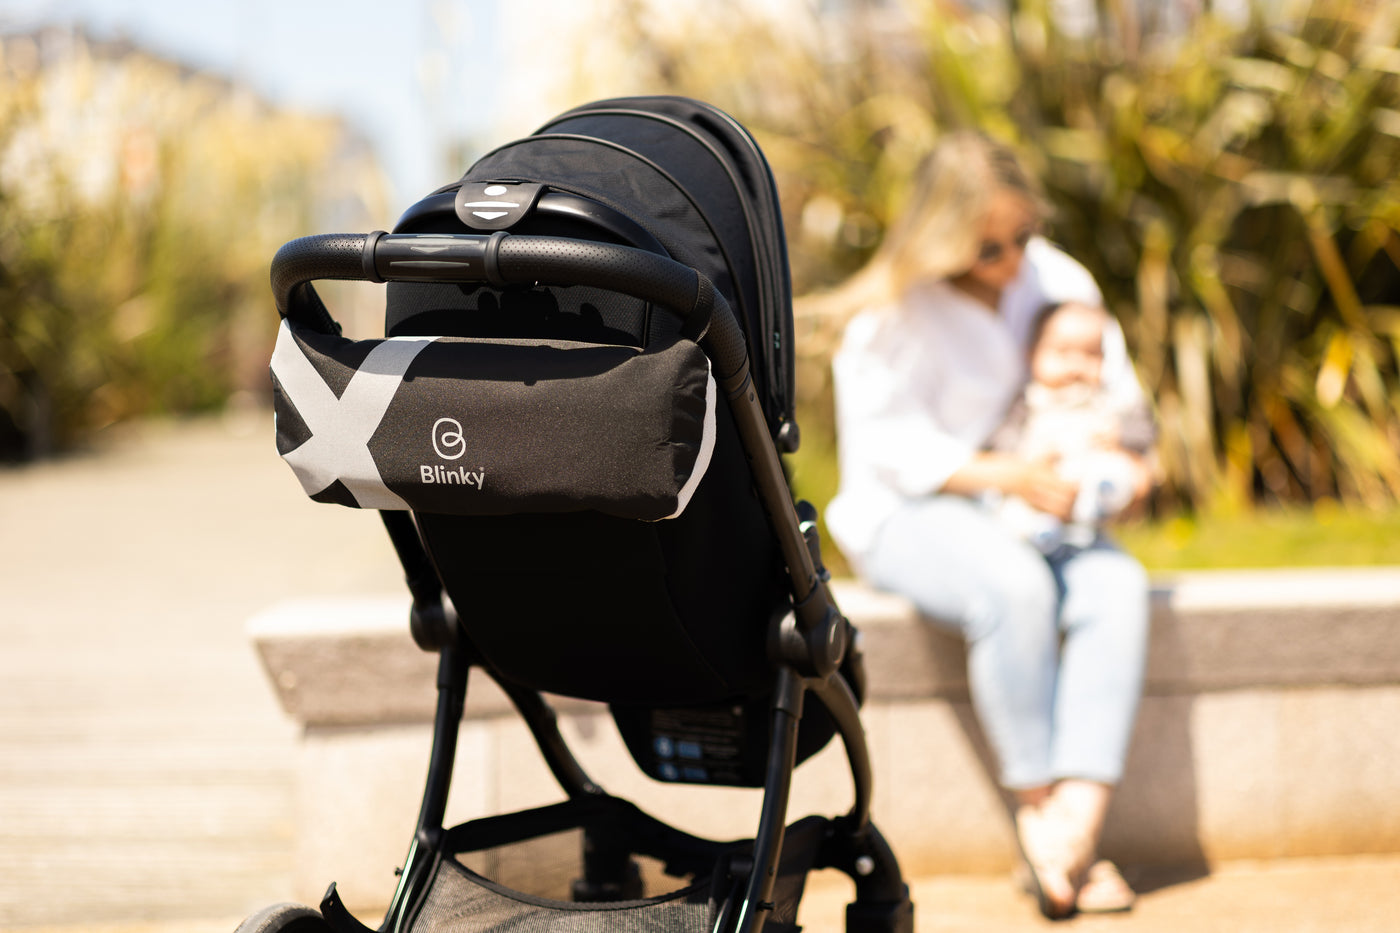 Lady in background with baby, close up of BlinkyWarm in Space packaged up on back of stroller